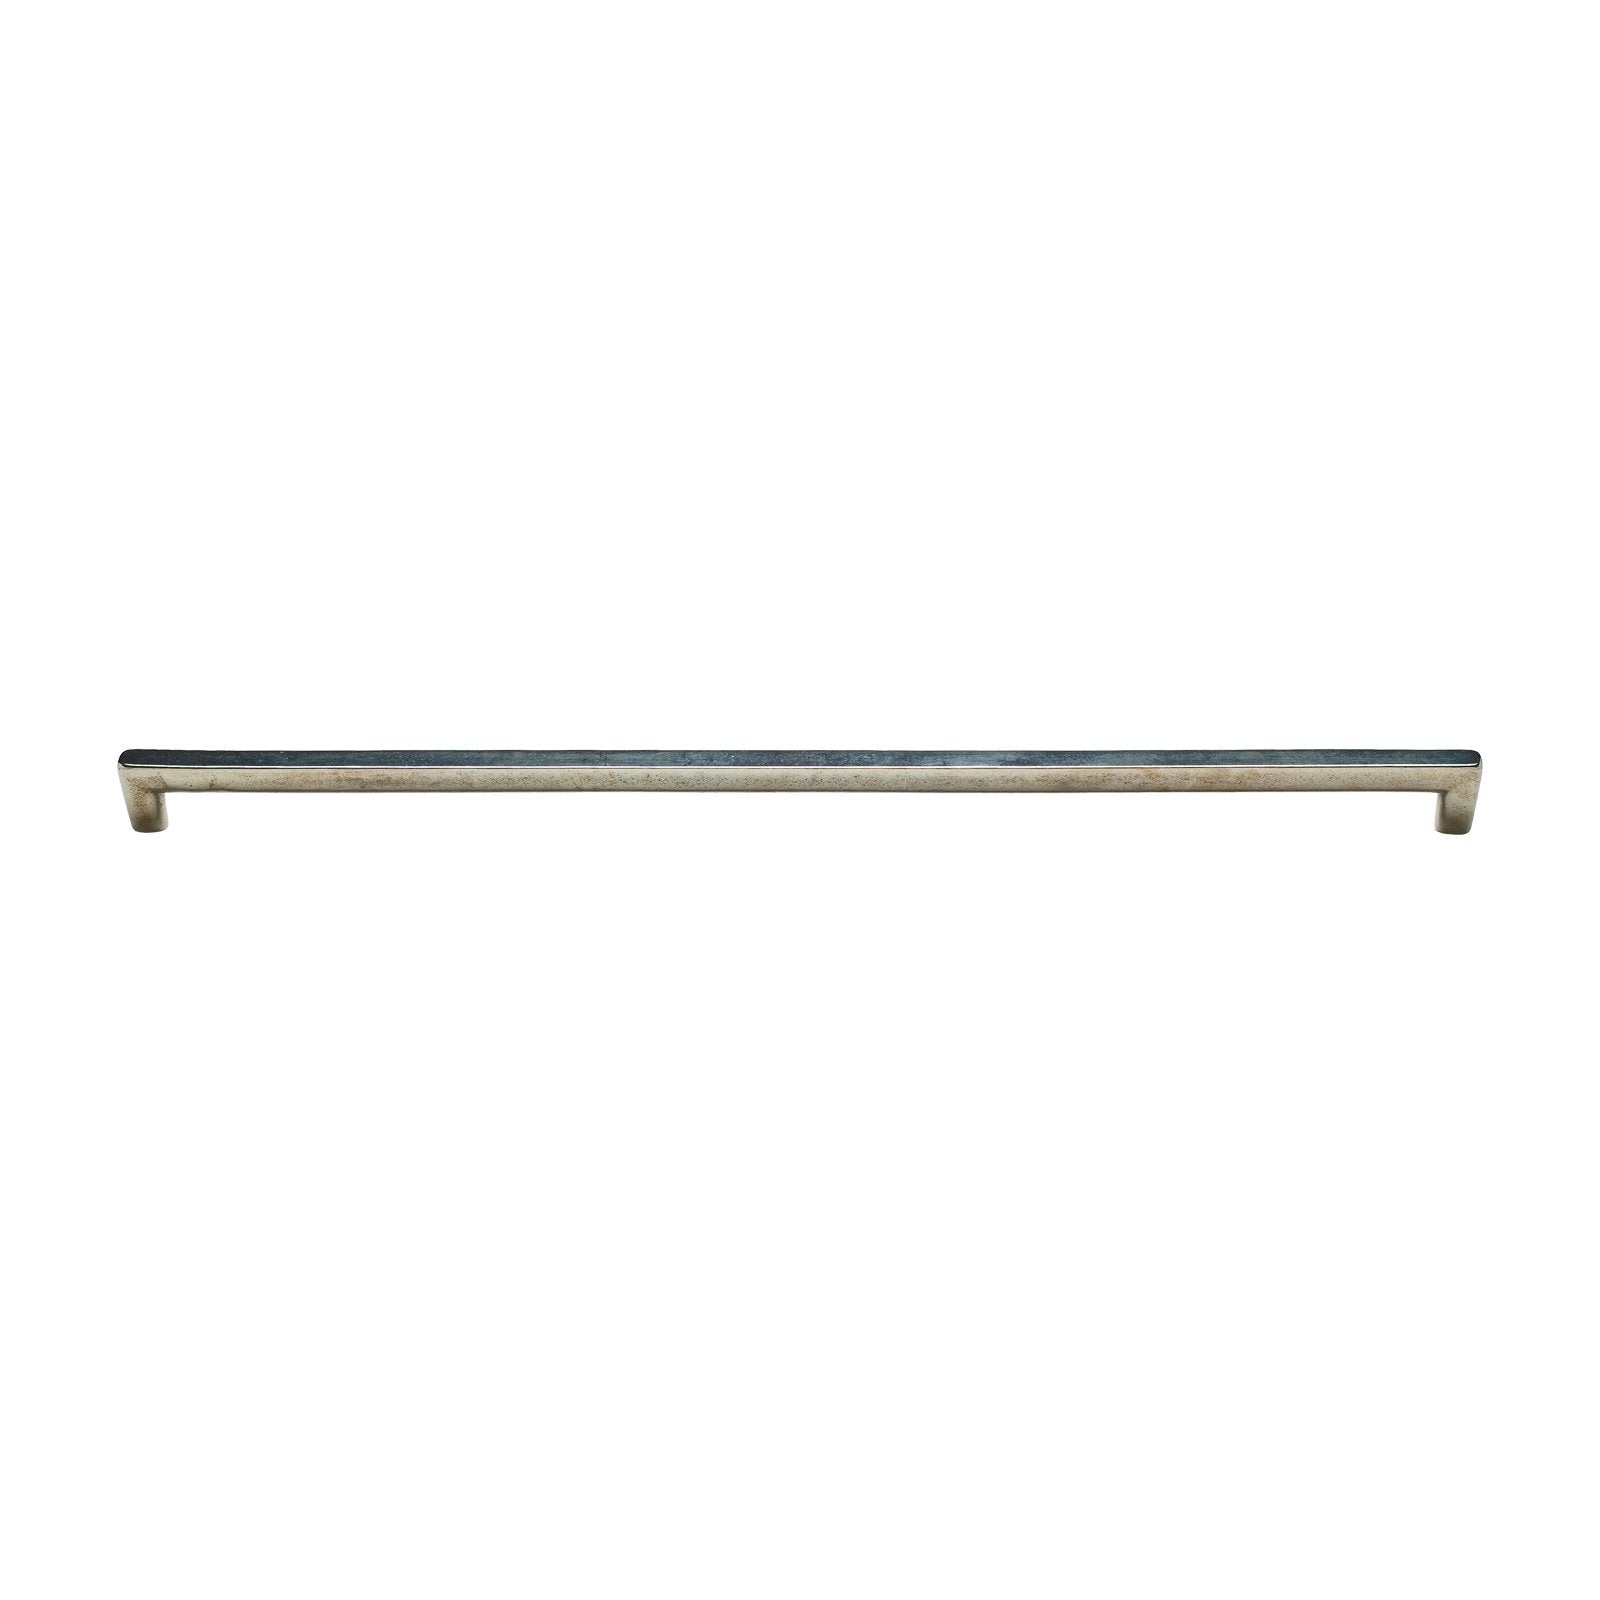 Rocky Mountain Hardware CK286 - 20" C-to-C Rail Cabinet Pull